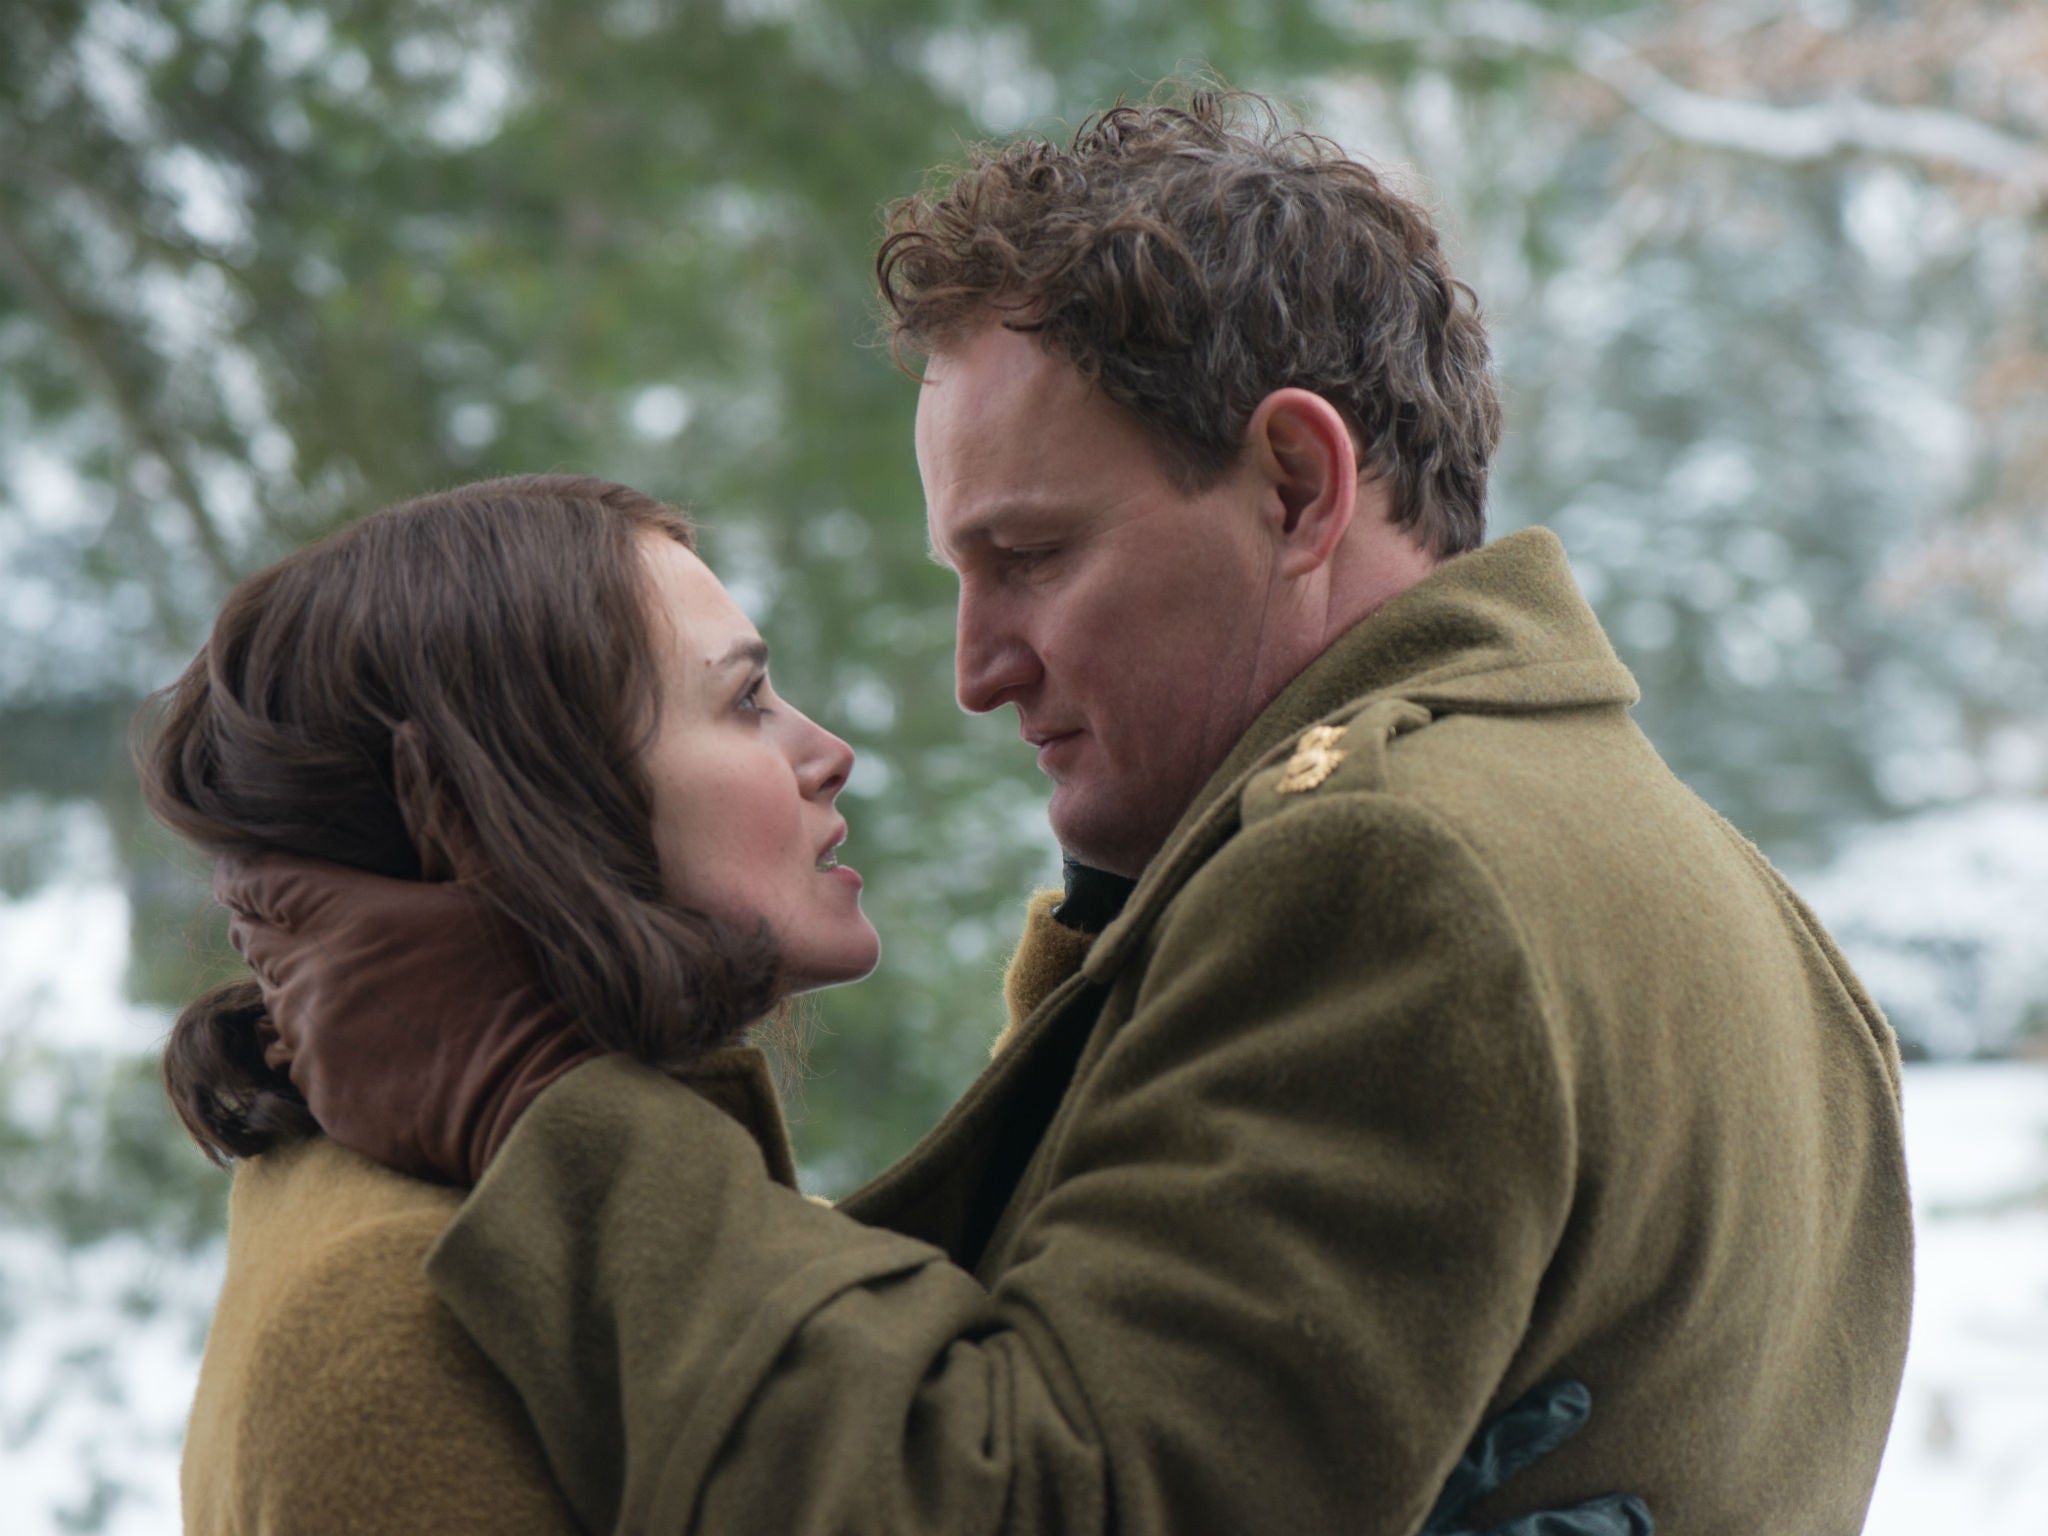 Keira Knightley and Jason Clarke star in the well-observed drama ‘The Aftermath’ that turns into a ‘Lady Chatterley‘-style romance